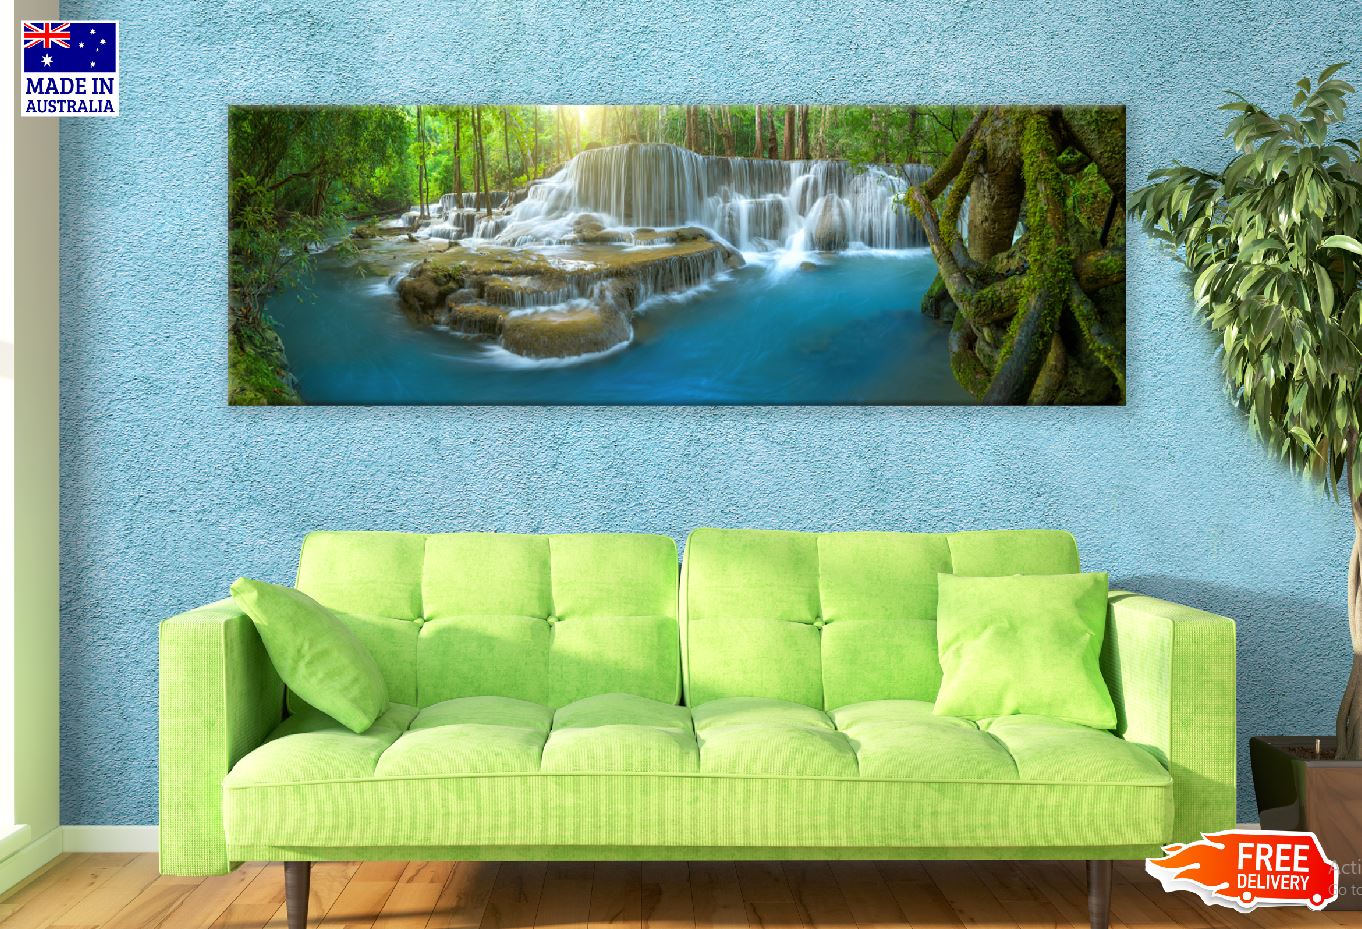 Panoramic Canvas Waterfall on Rocks View Photograph High Quality 100% Australian Made Wall Canvas Print Ready to Hang